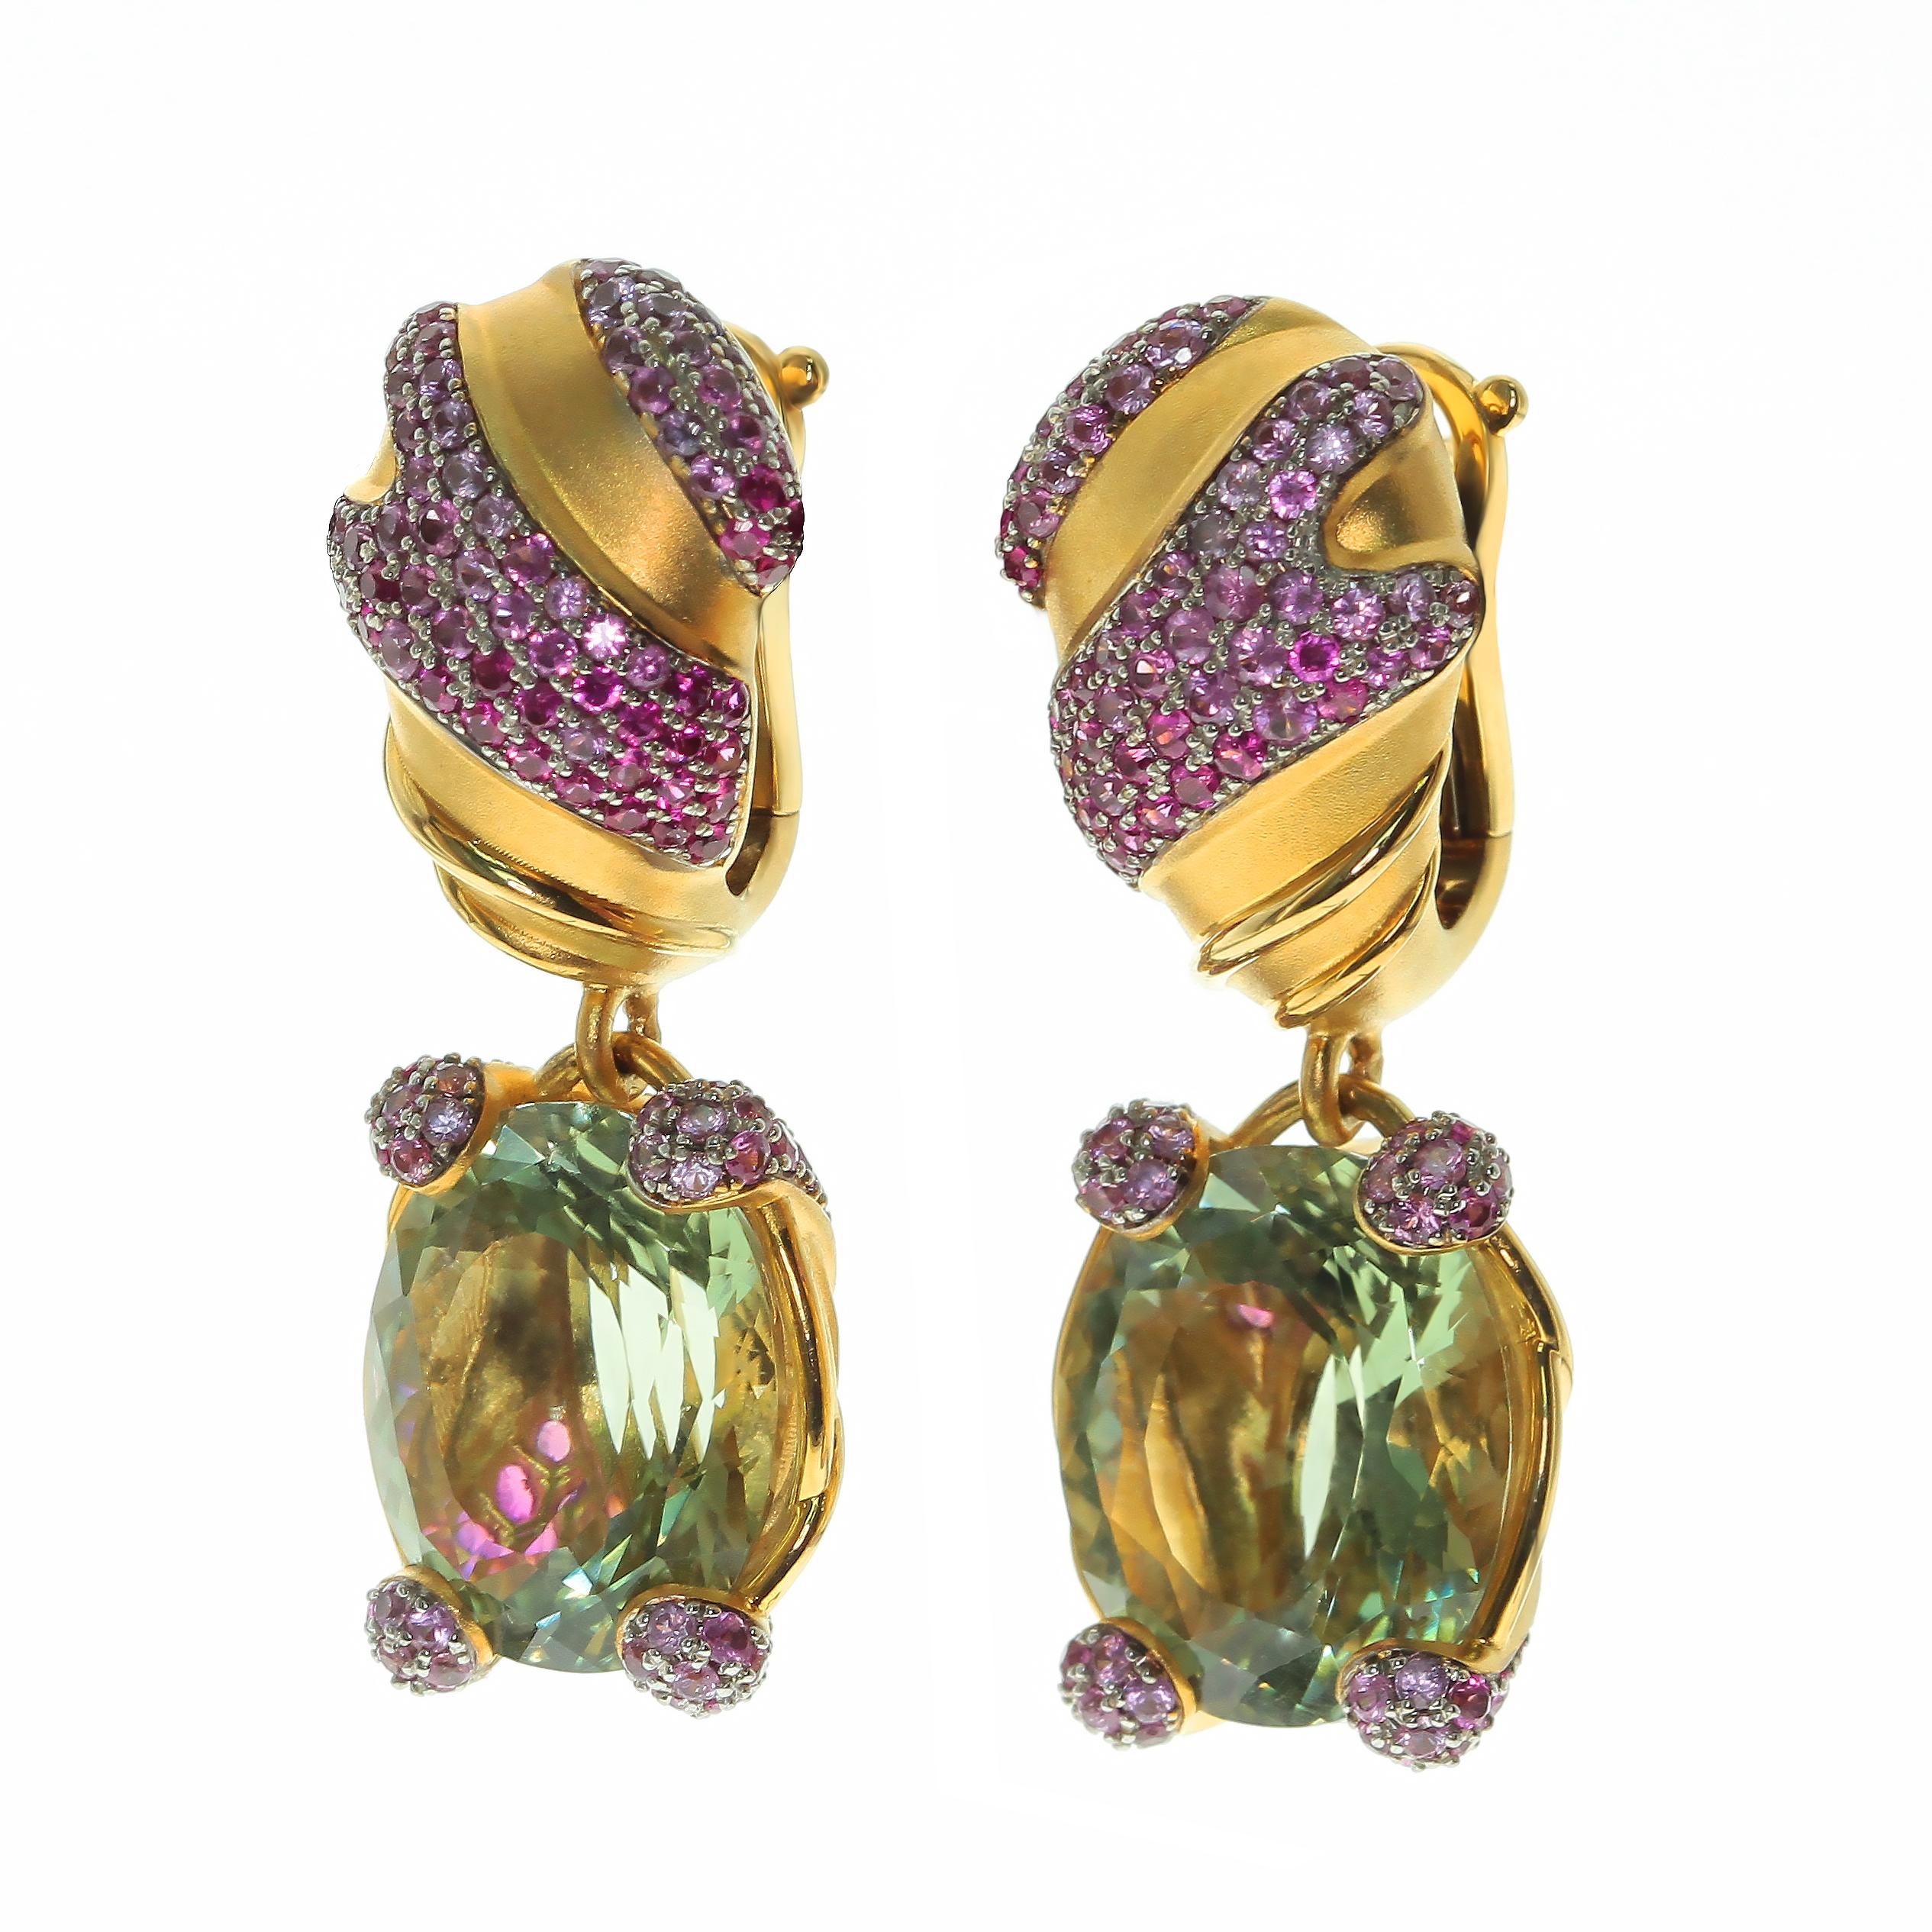 Green Amethyst Pink Sapphire 18 Karat Yellow Gold Earrings
Green Amethysts weighing 8.76 carat are the center of the designer's artistic project. Yellow 18 Karat Matte Gold perfectly set off the shimmer of Pink Sapphires. Gold color remind us the